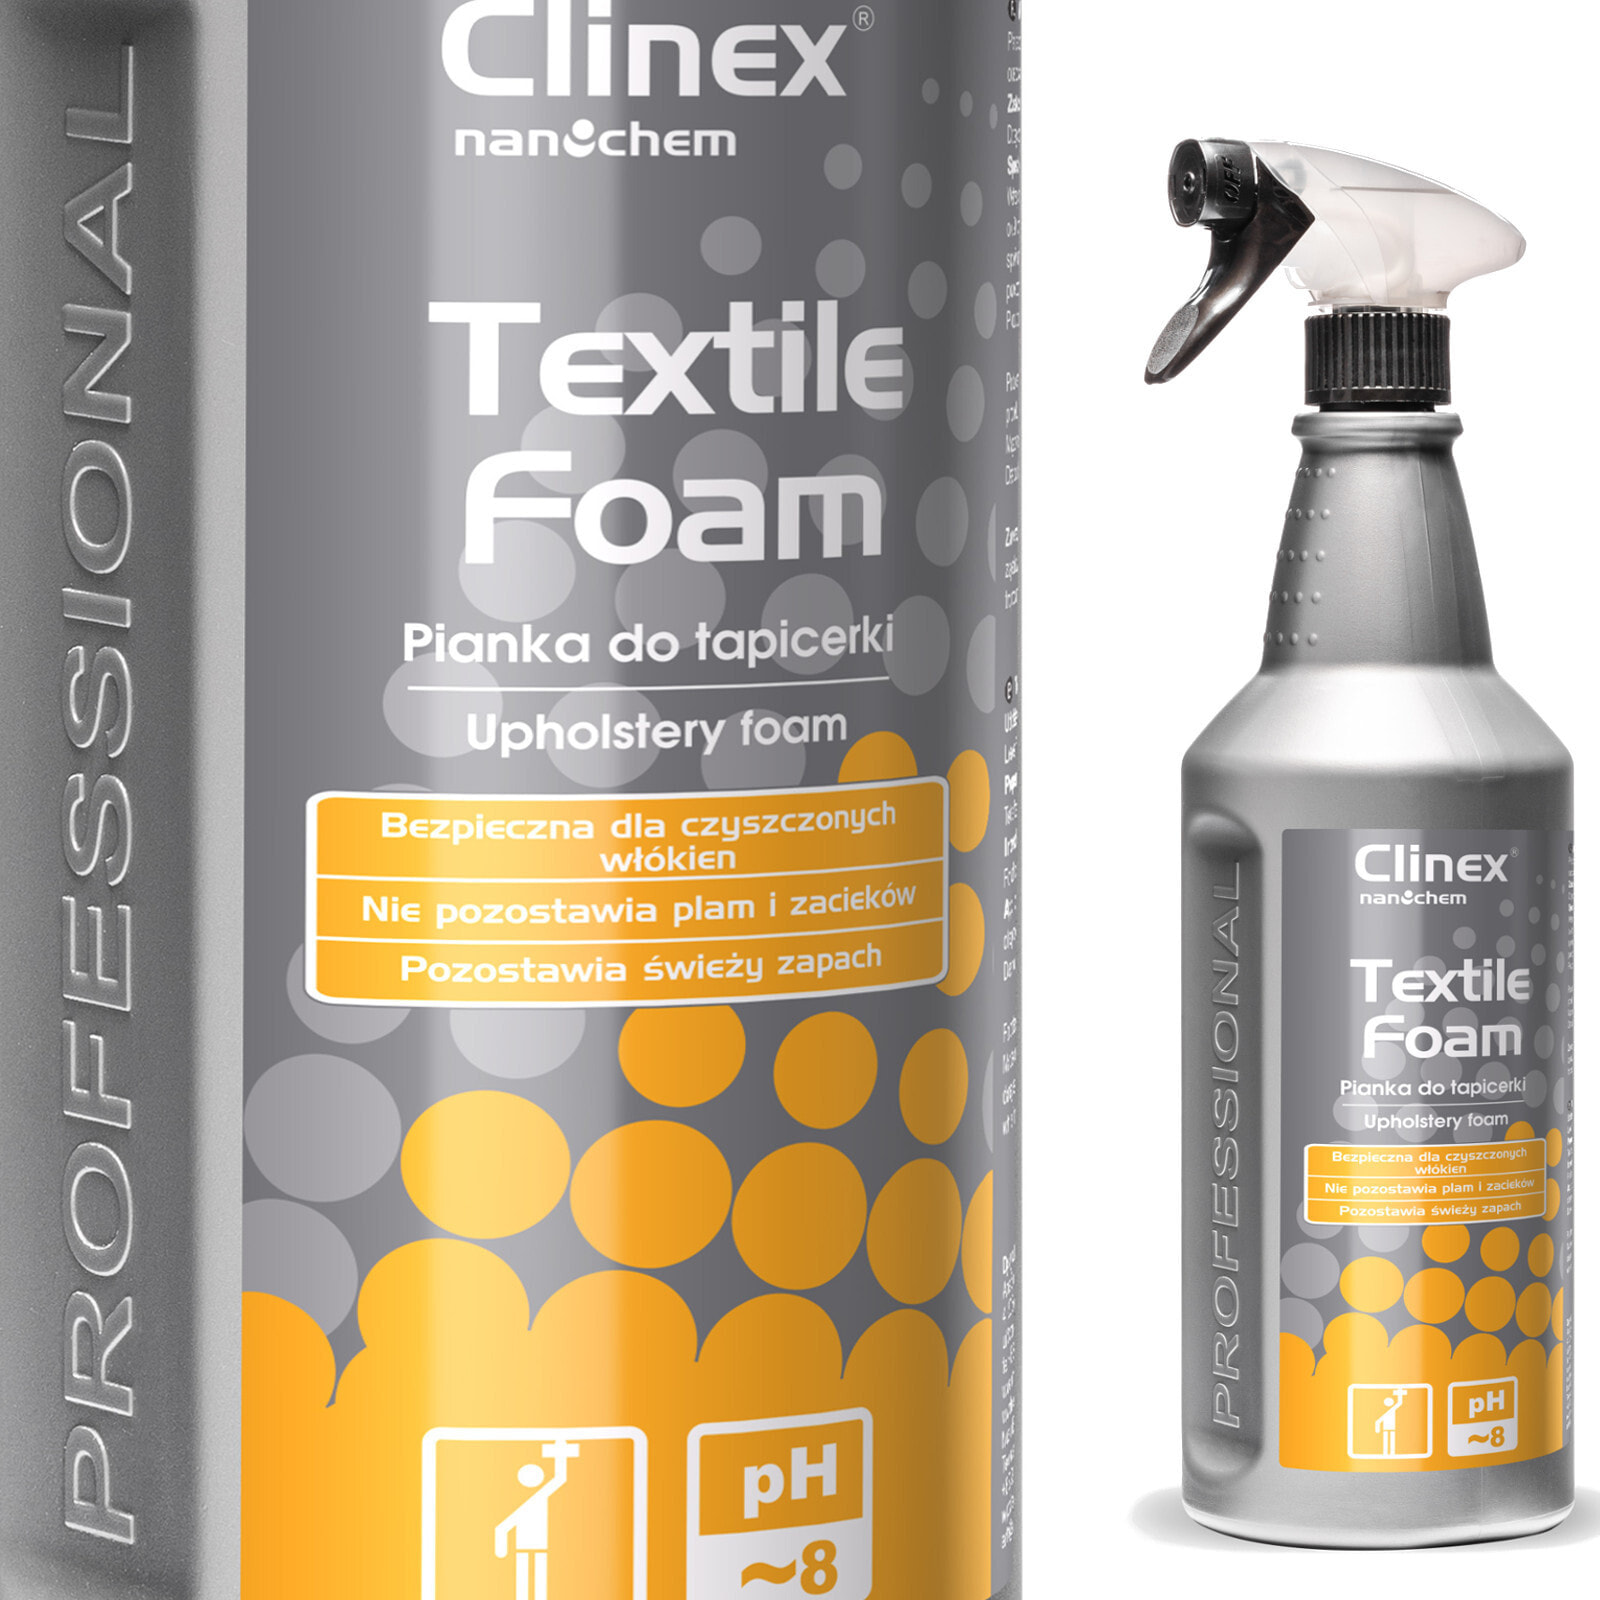 CLINEX Textile Foam 1L washing foam for cleaning stains from carpets, furniture and upholstery